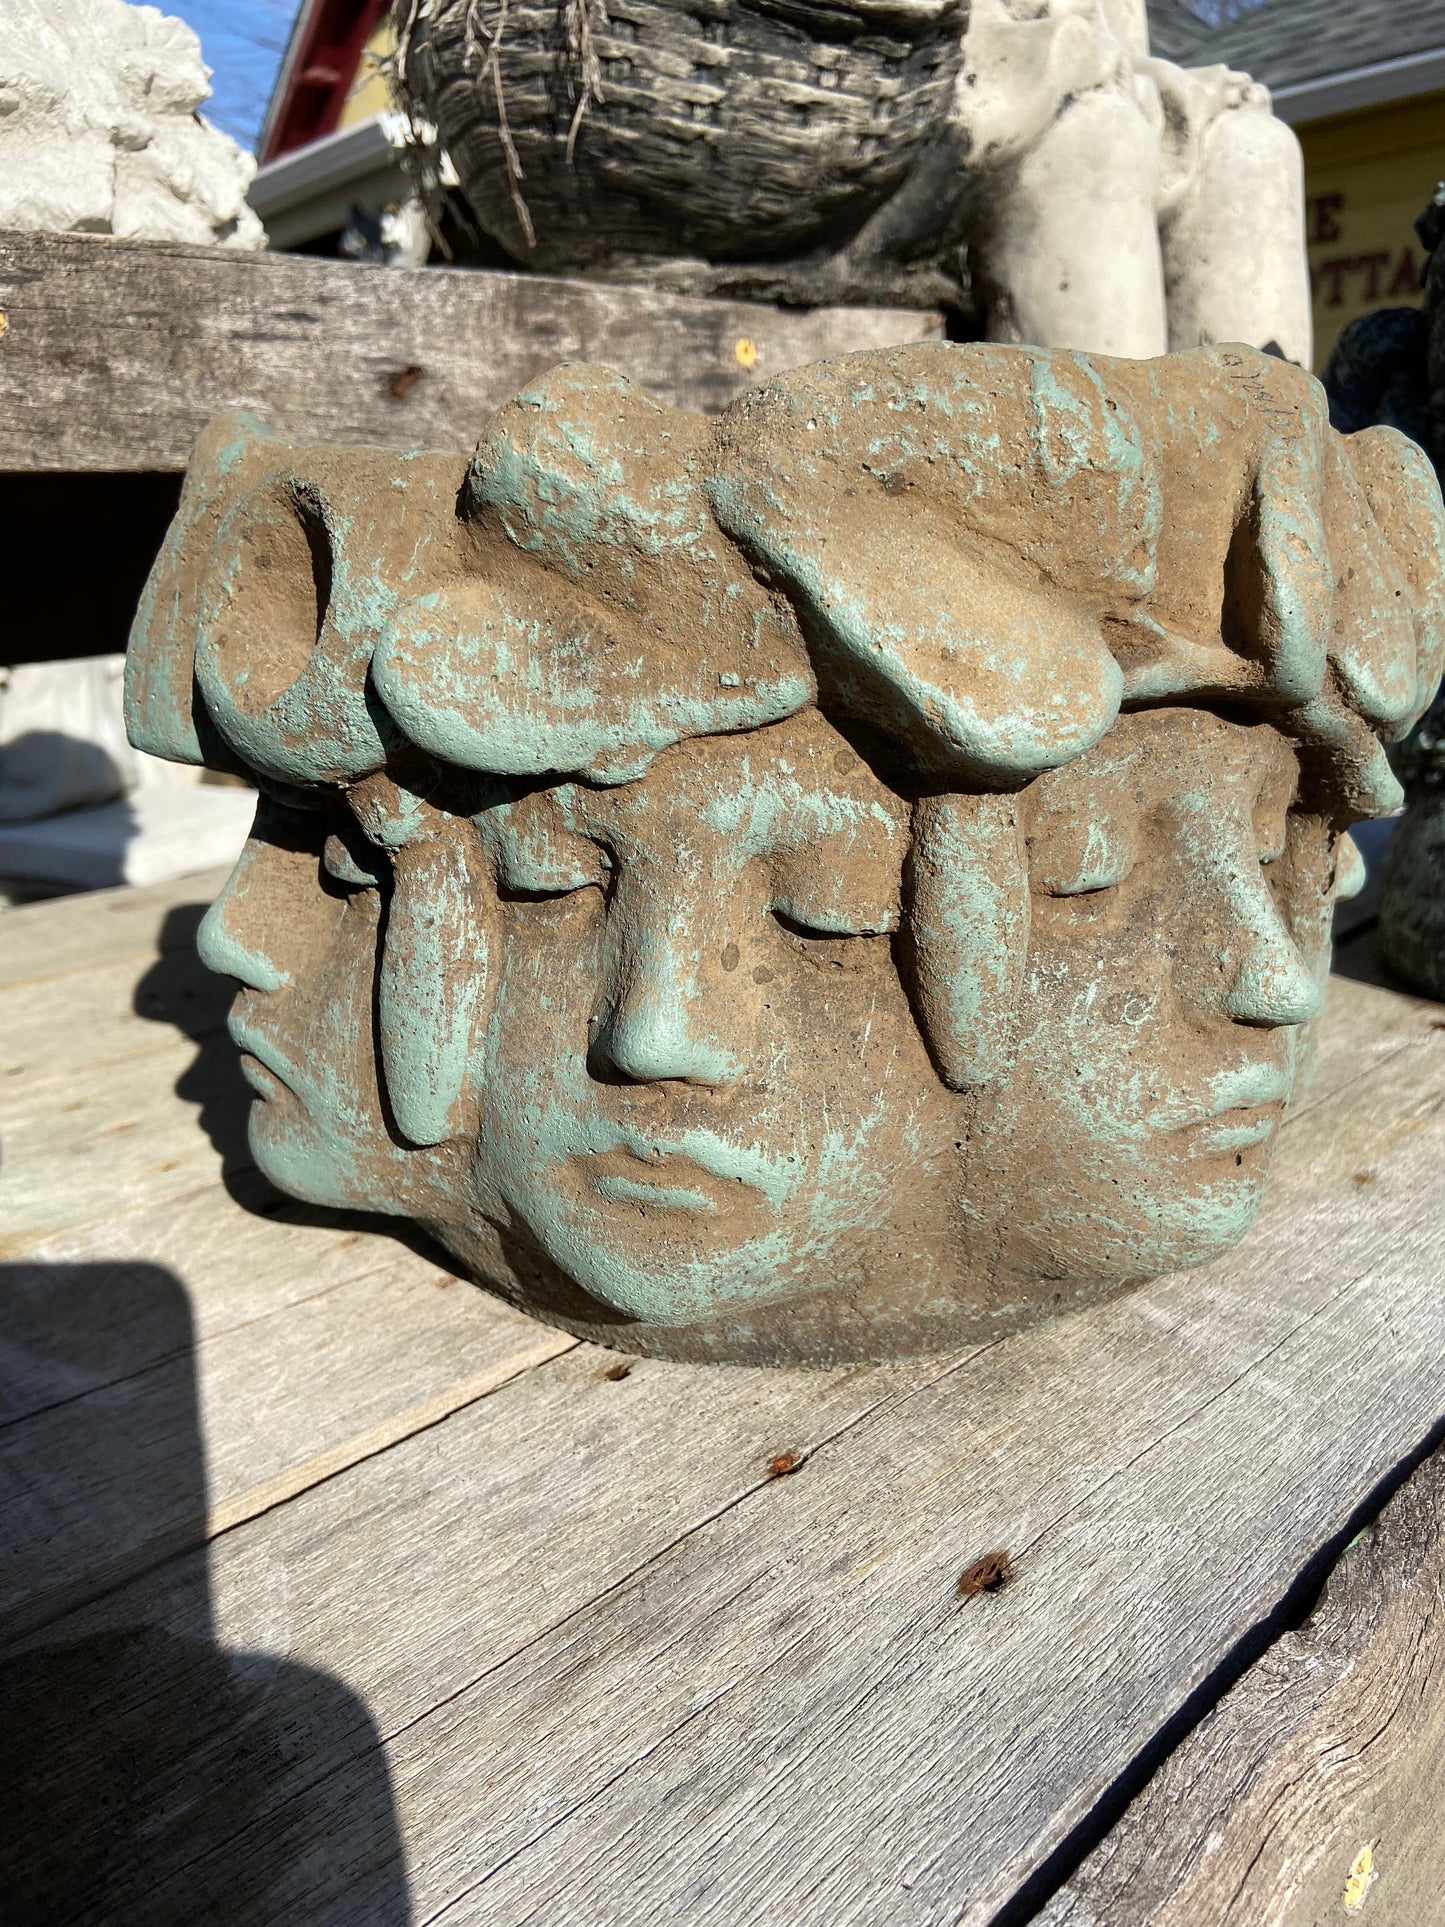 Pot with many Faces